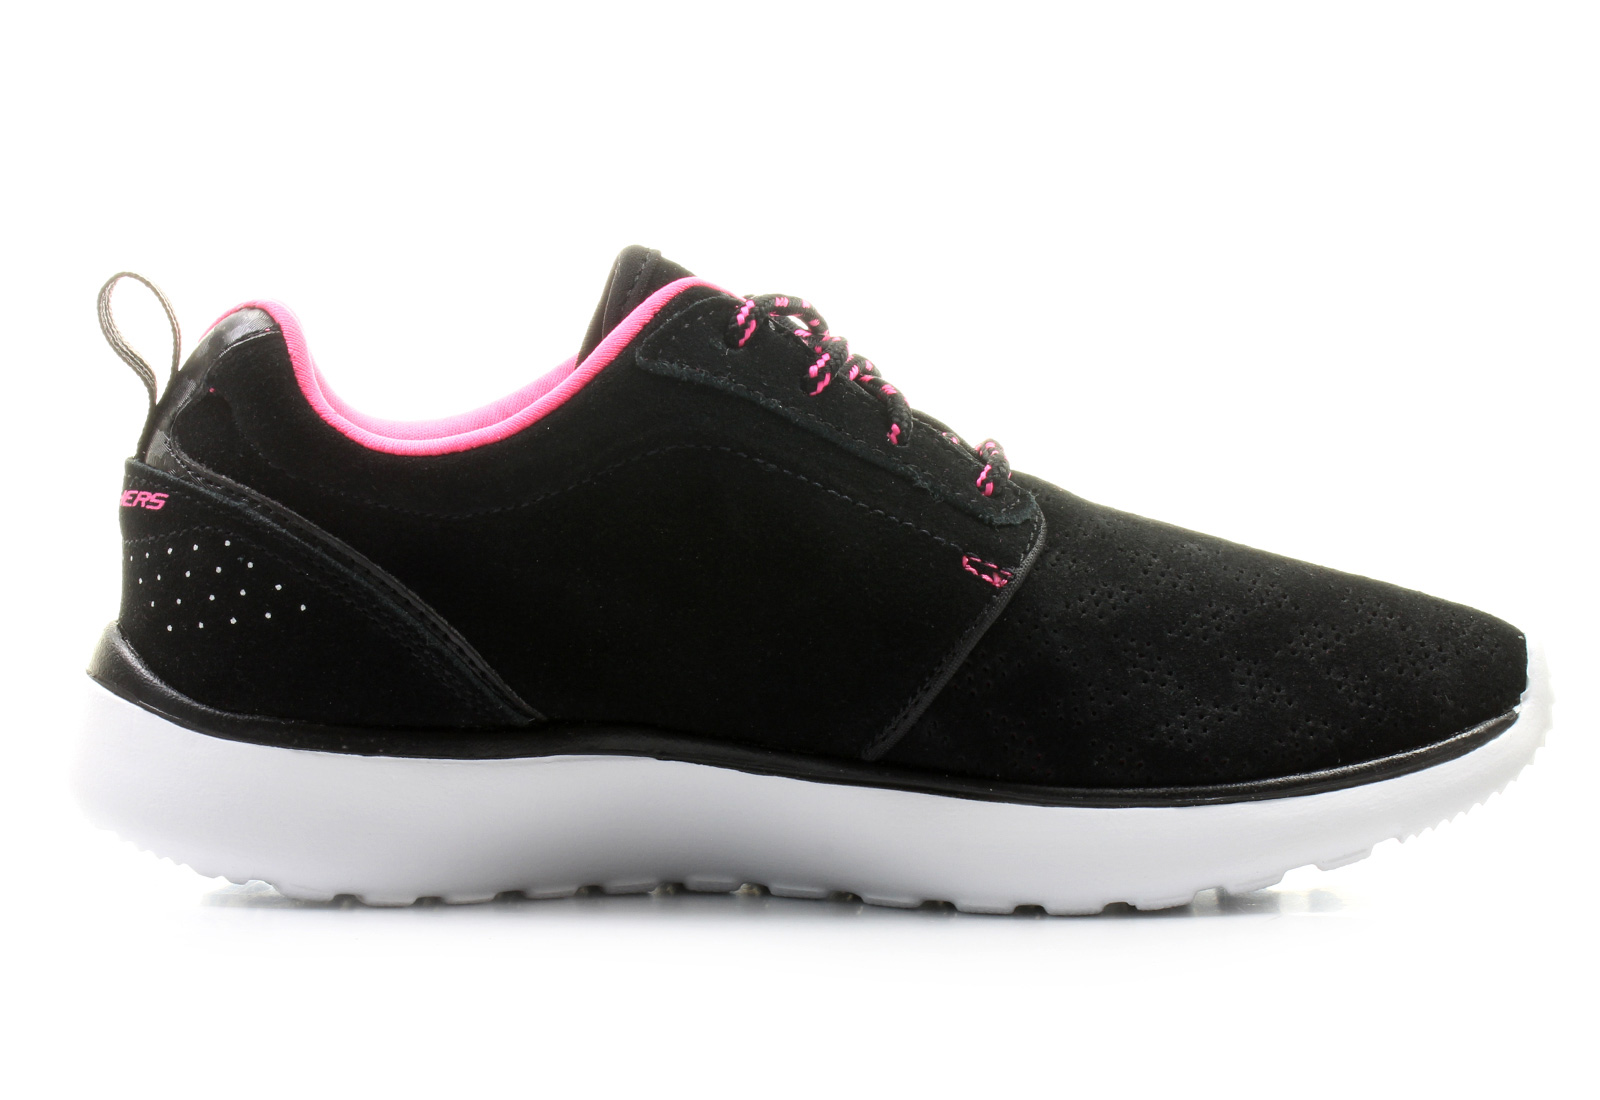 Skechers Shoes - Everything Nice - 12081-bkhp - Online shop for ...